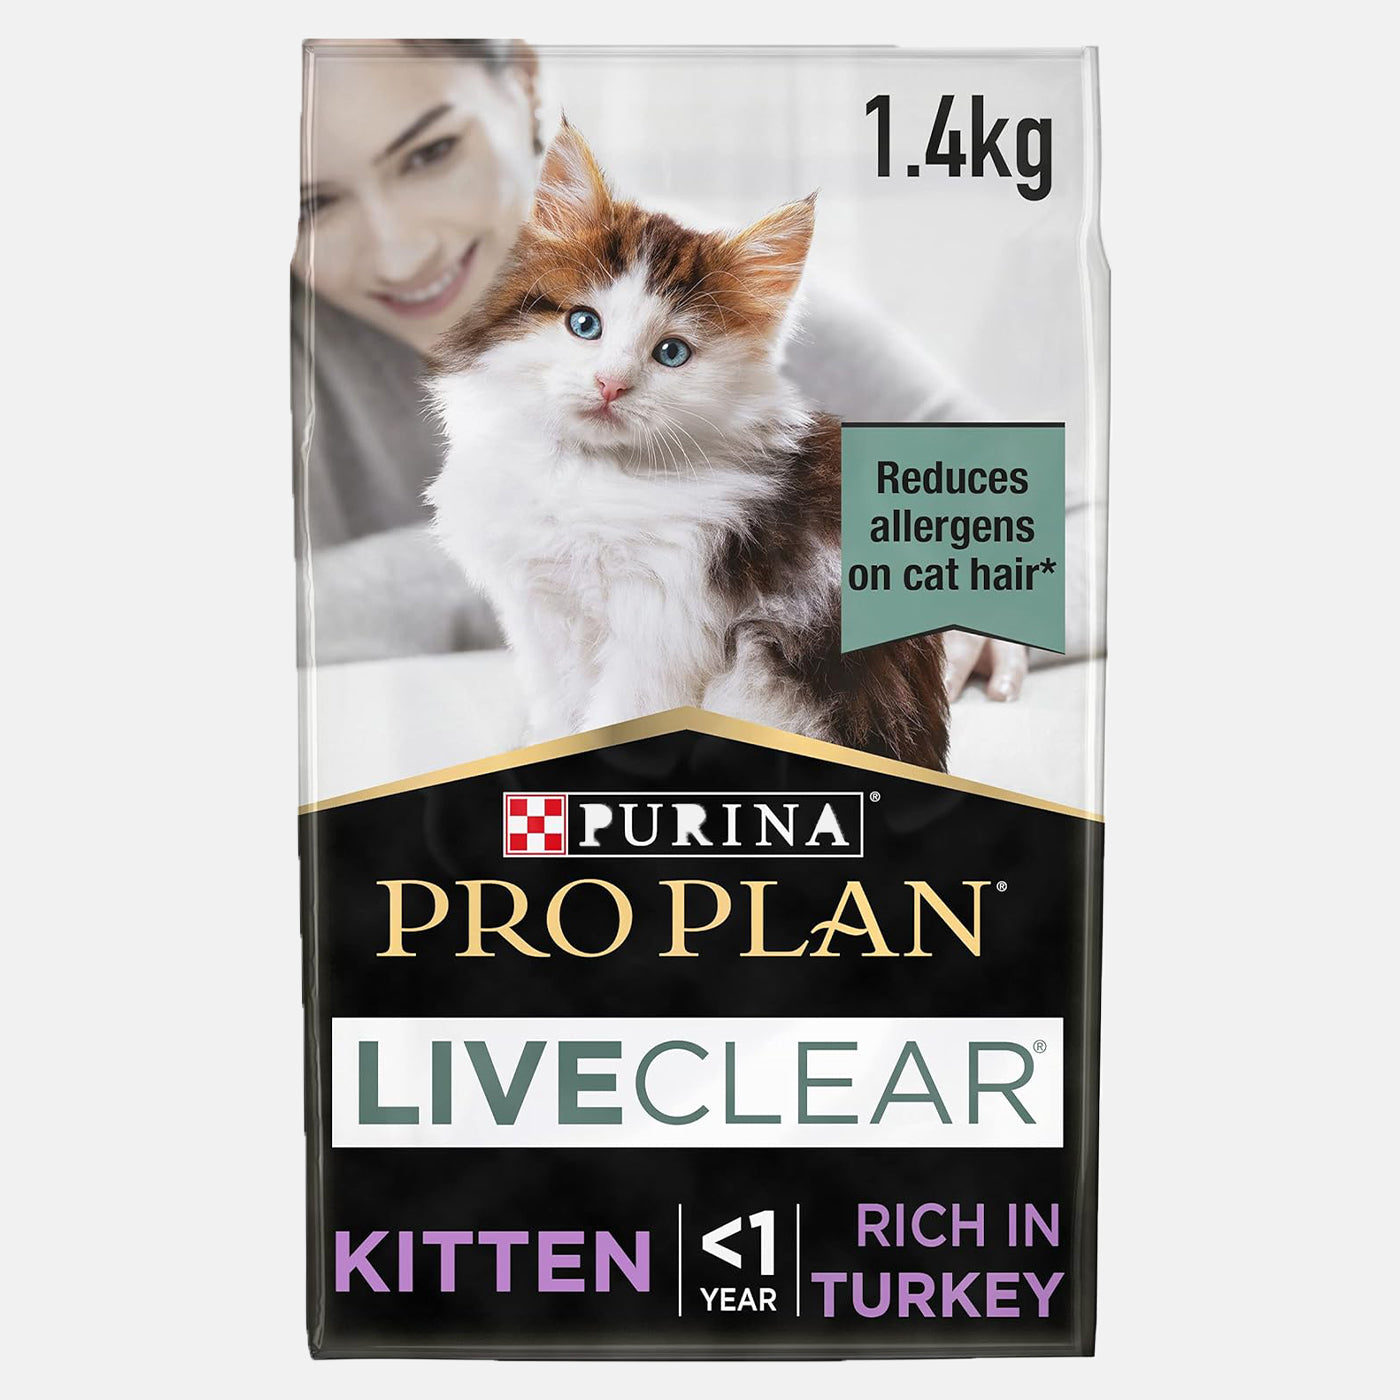 PRO PLAN Live Clear Kitten Dry Food with Turkey 1.4kg